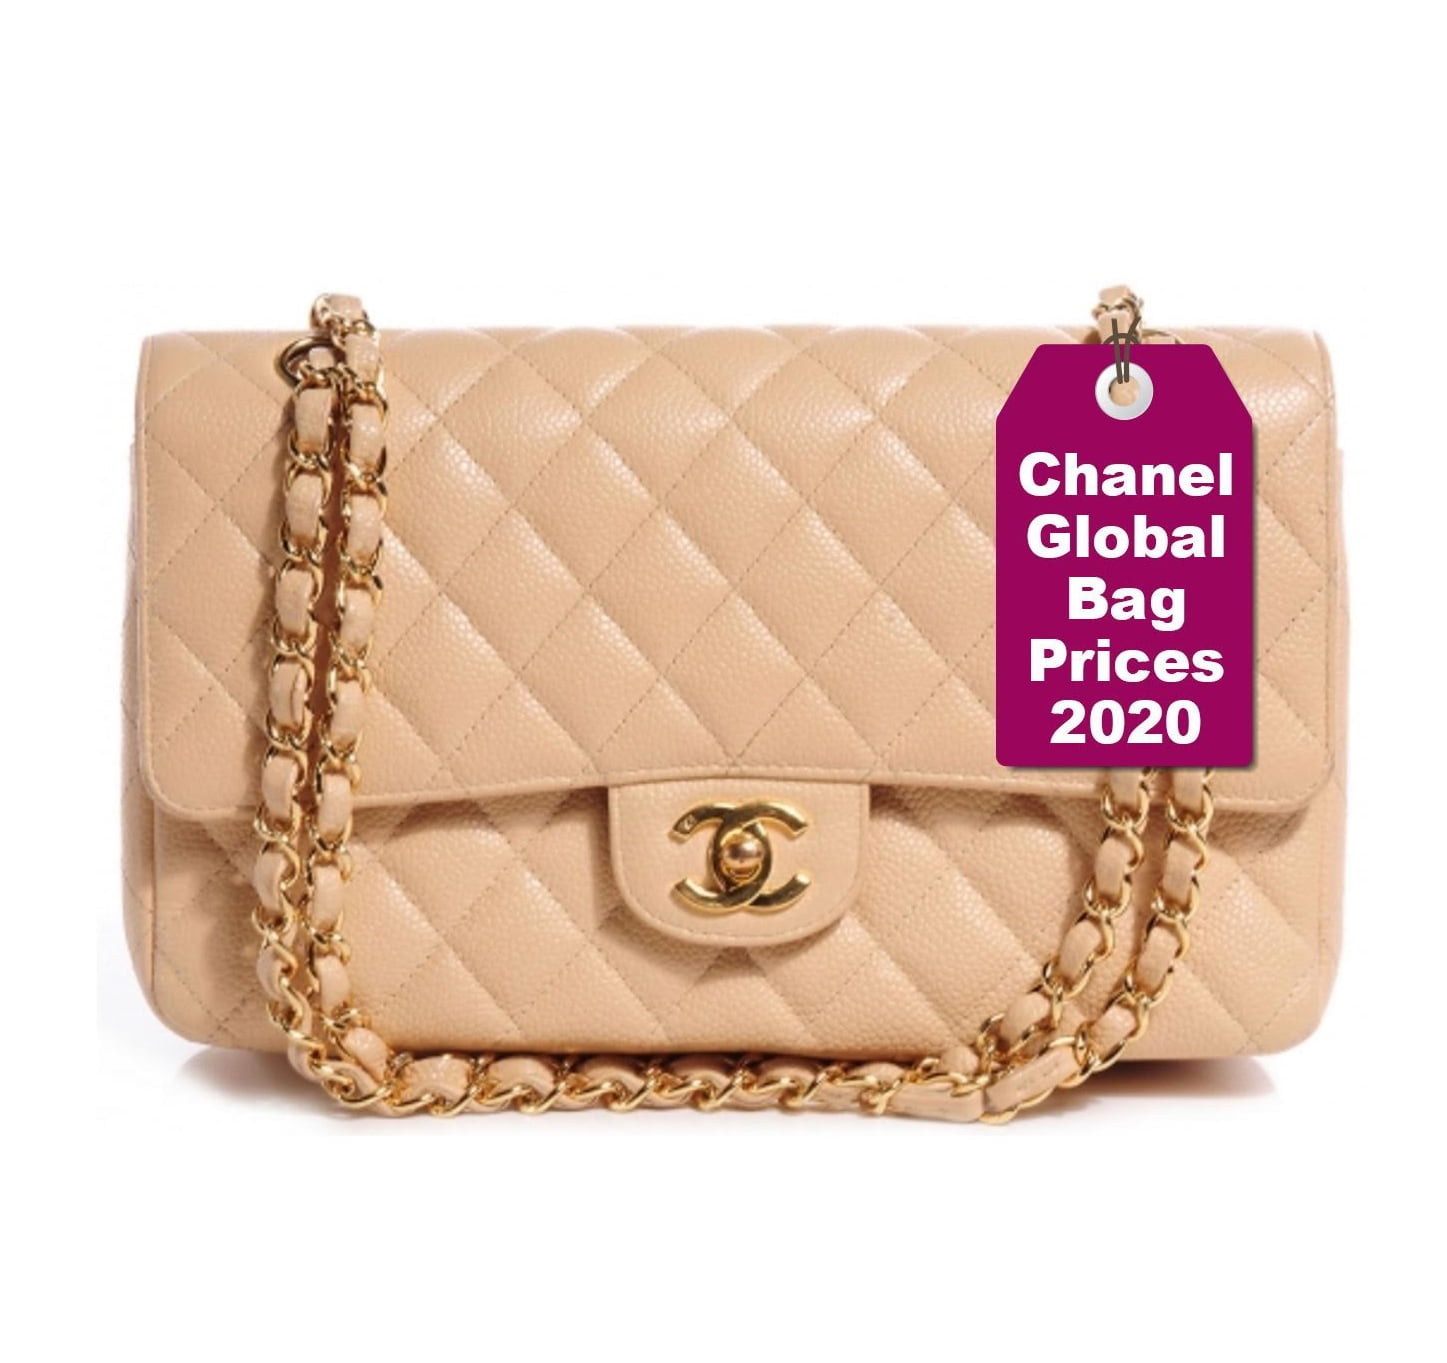 how much is a classic chanel handbag